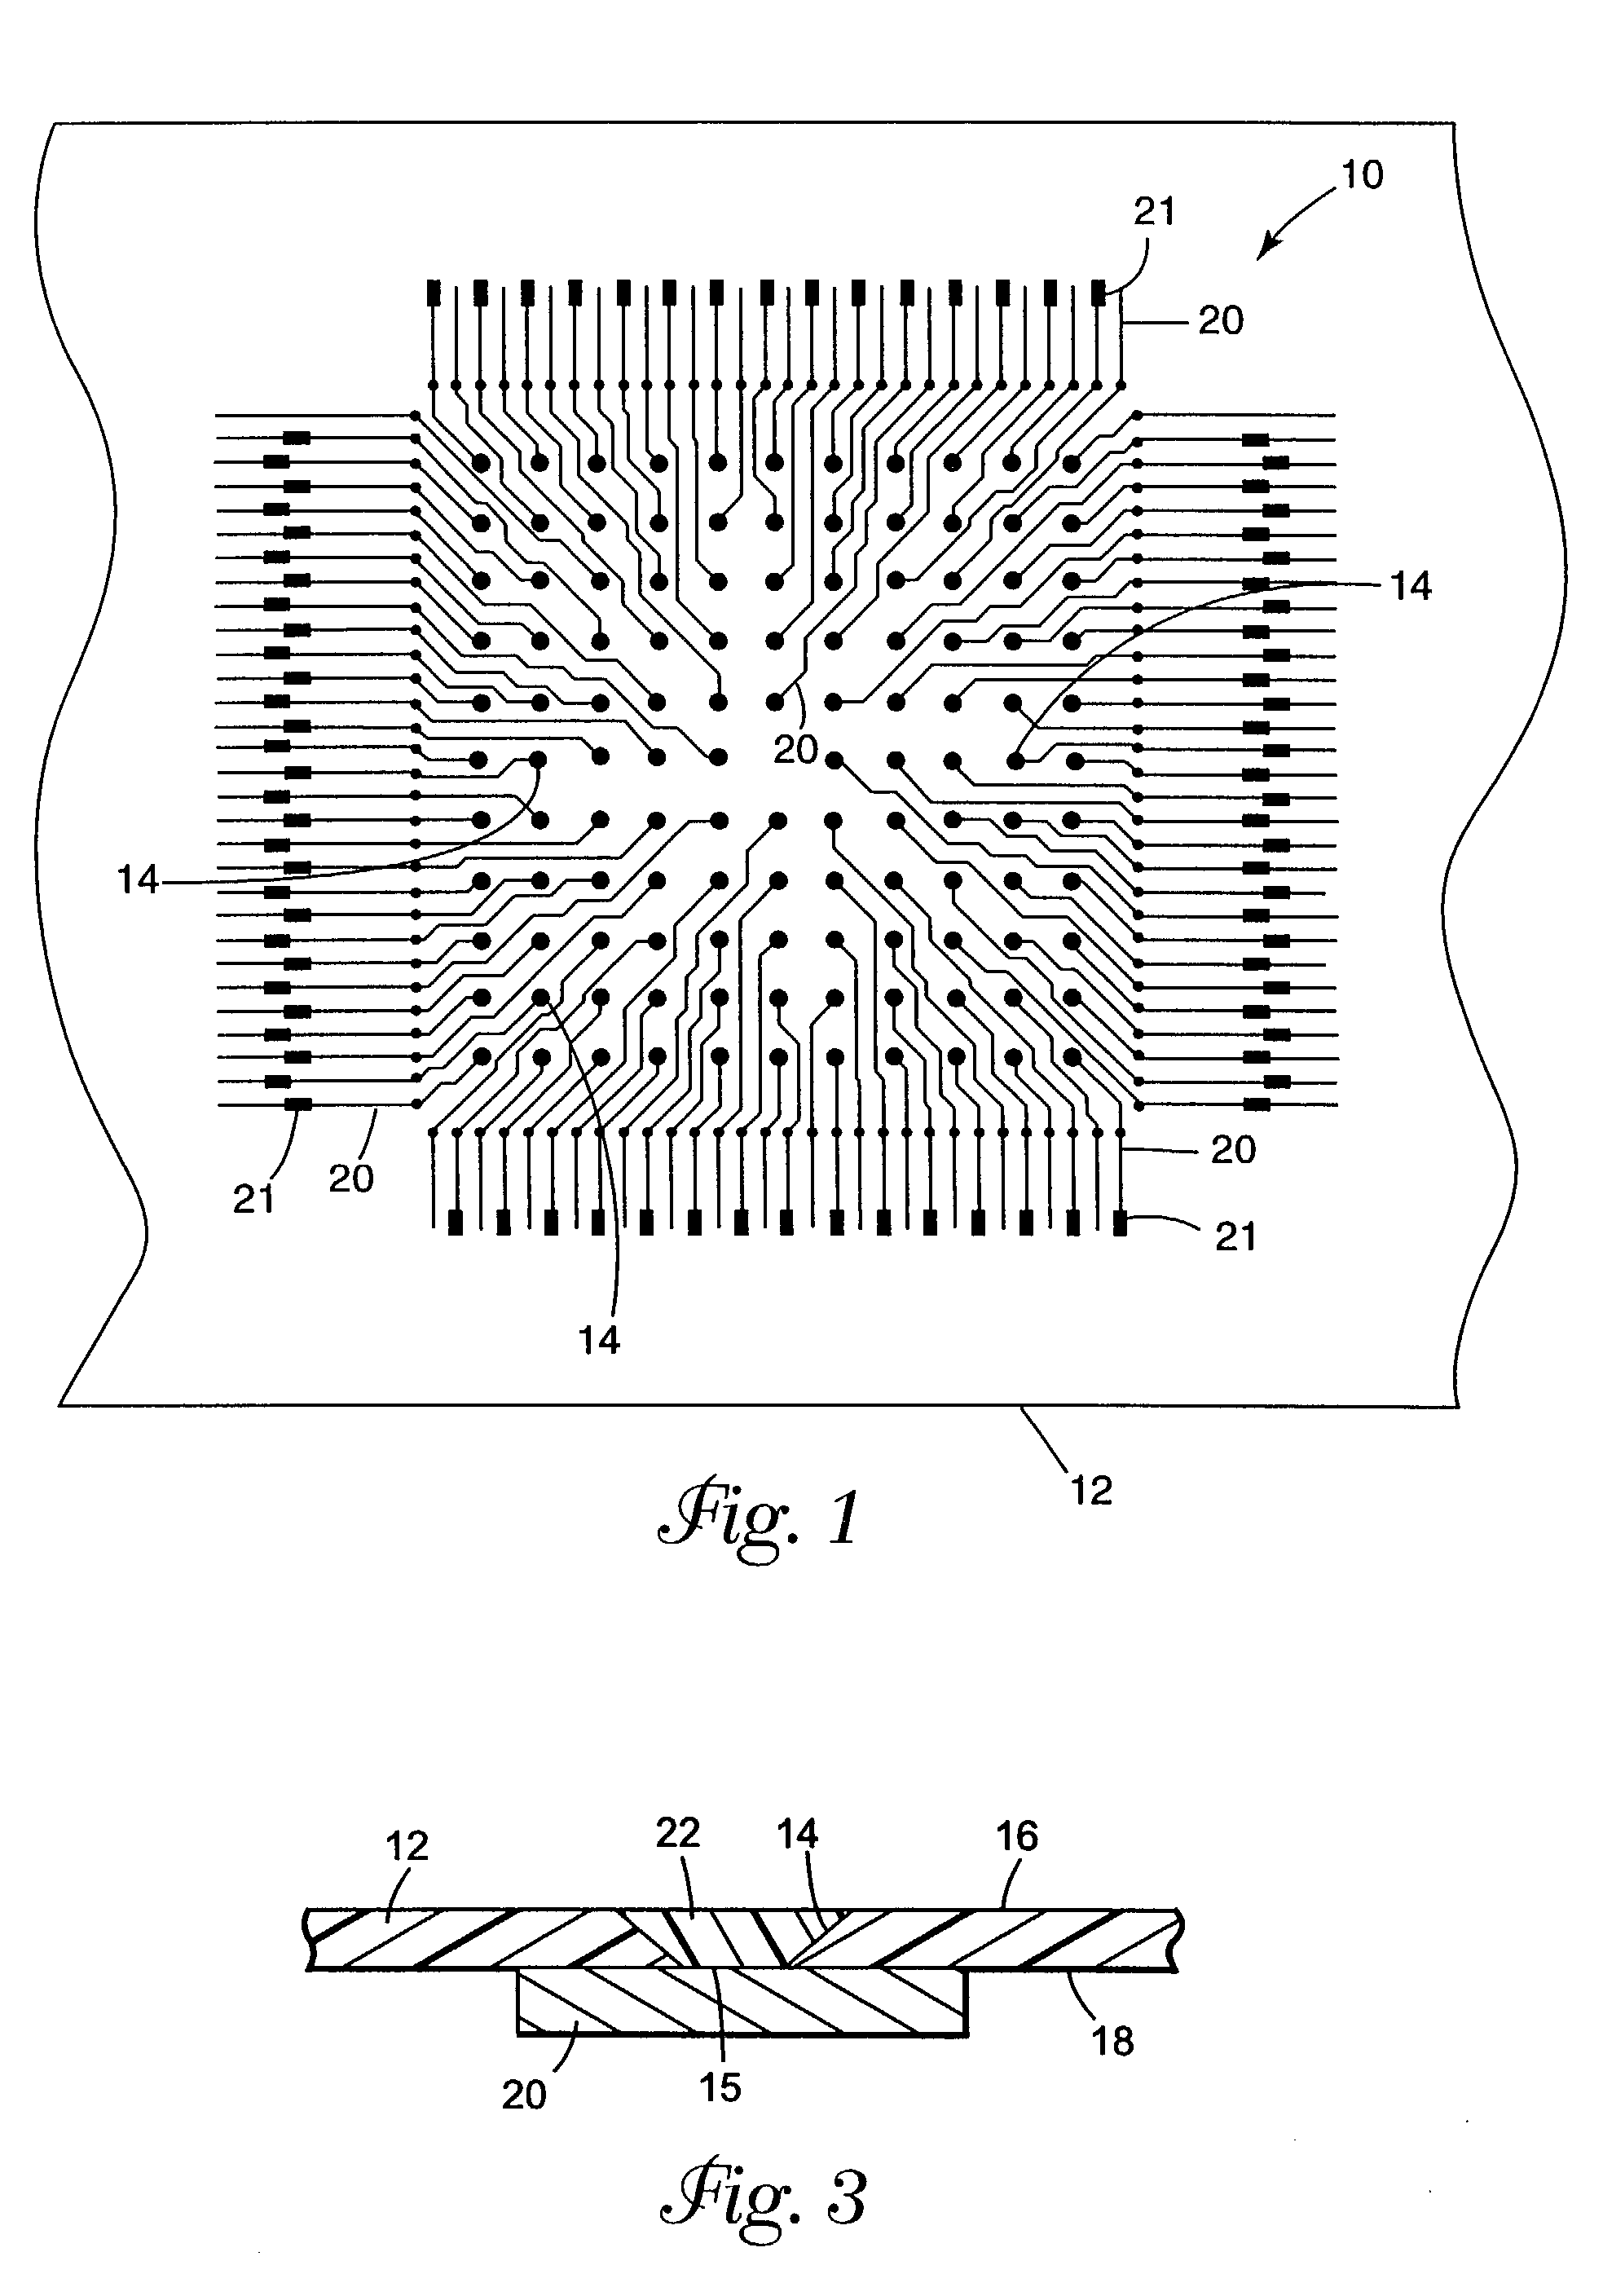 Film based addressable programmable electronic matrix articles and methods of manufacturing and using the same